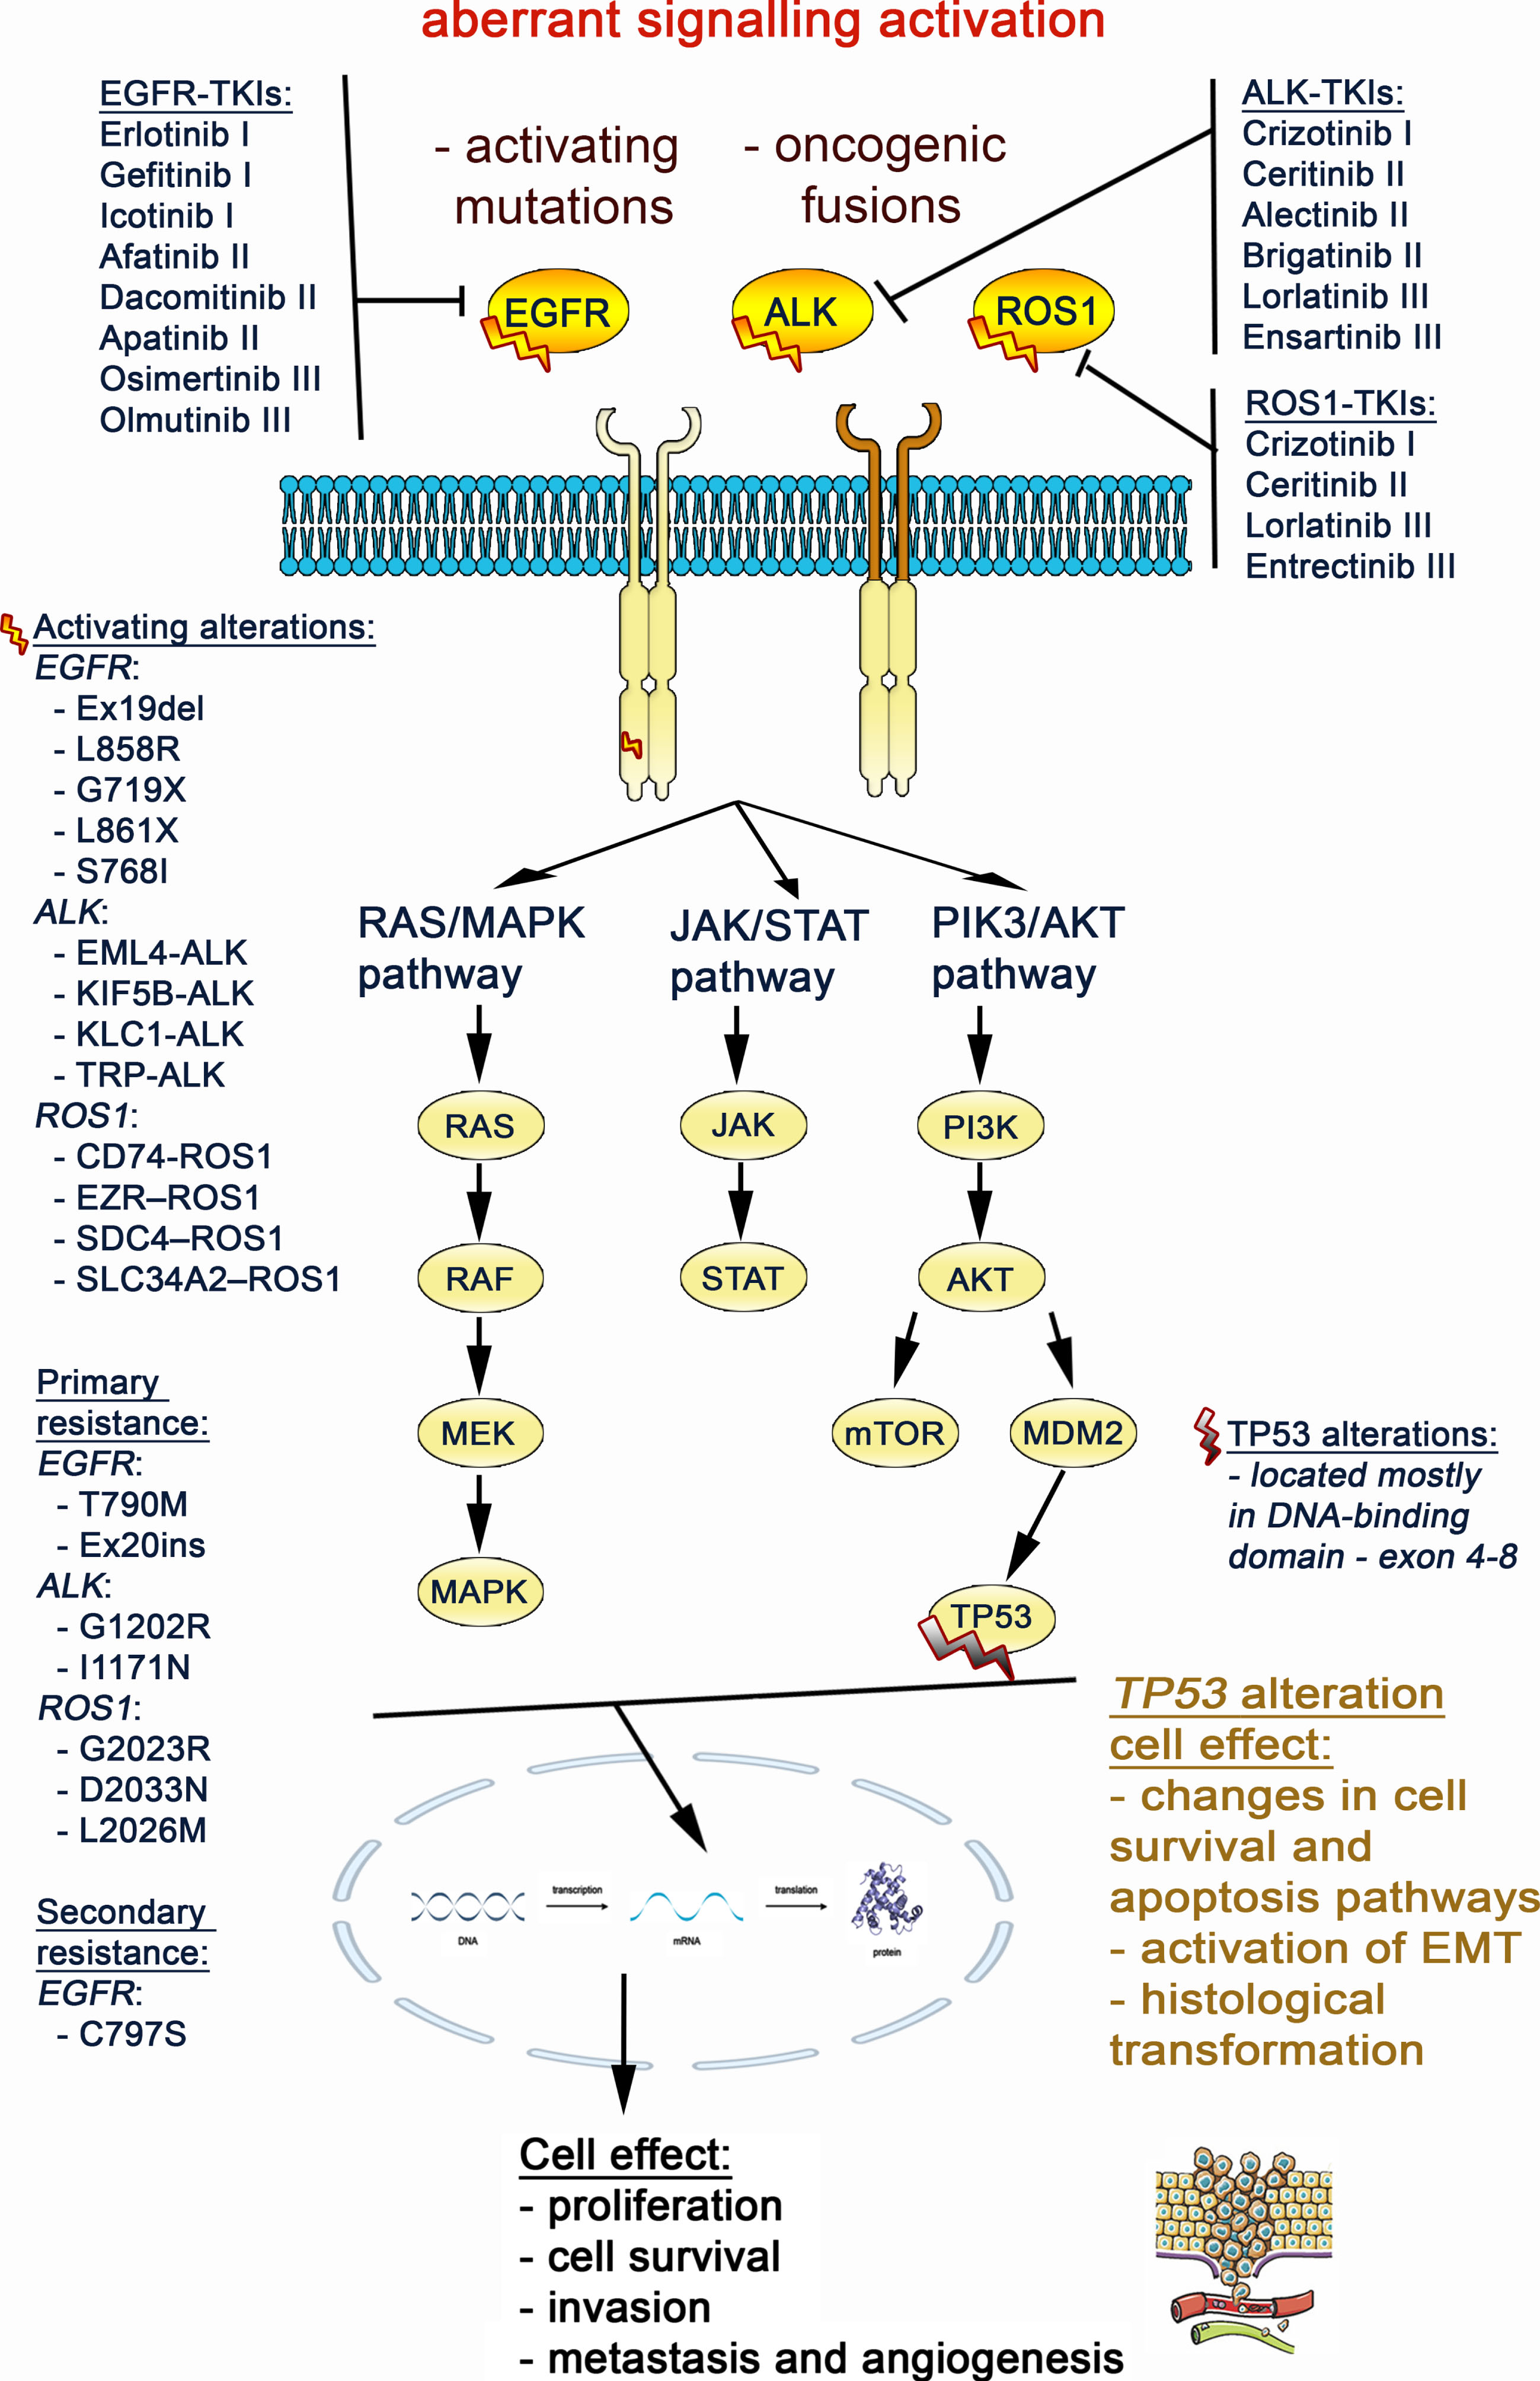 Aberrant activation of the EGFR, ALK and ROS1 gene triggers signaling through the MAPK, JAK/STAT and PI3K/AKT/mTOR pathways, that results in promoting lung cancer cell migration and proliferation. The TP53 mutation impact on cell signaling was also marked at crossing point with the EGFR, ALK, ROS1 pathways.